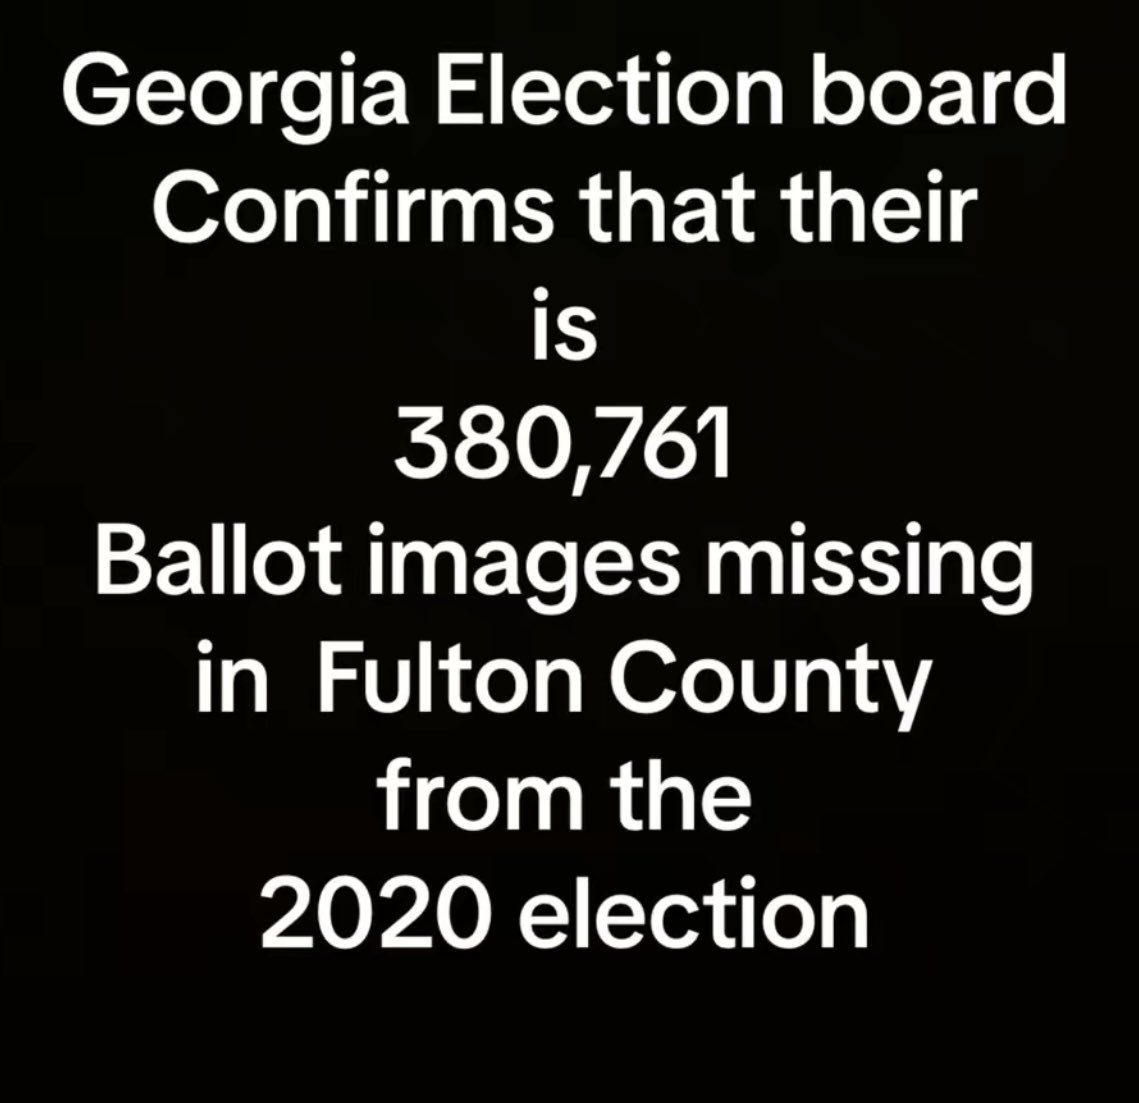 So why is Trump still being prosecuted for verbally challenging the Georgia election results? He was right again! Mistrial! Trump 2024! 💥